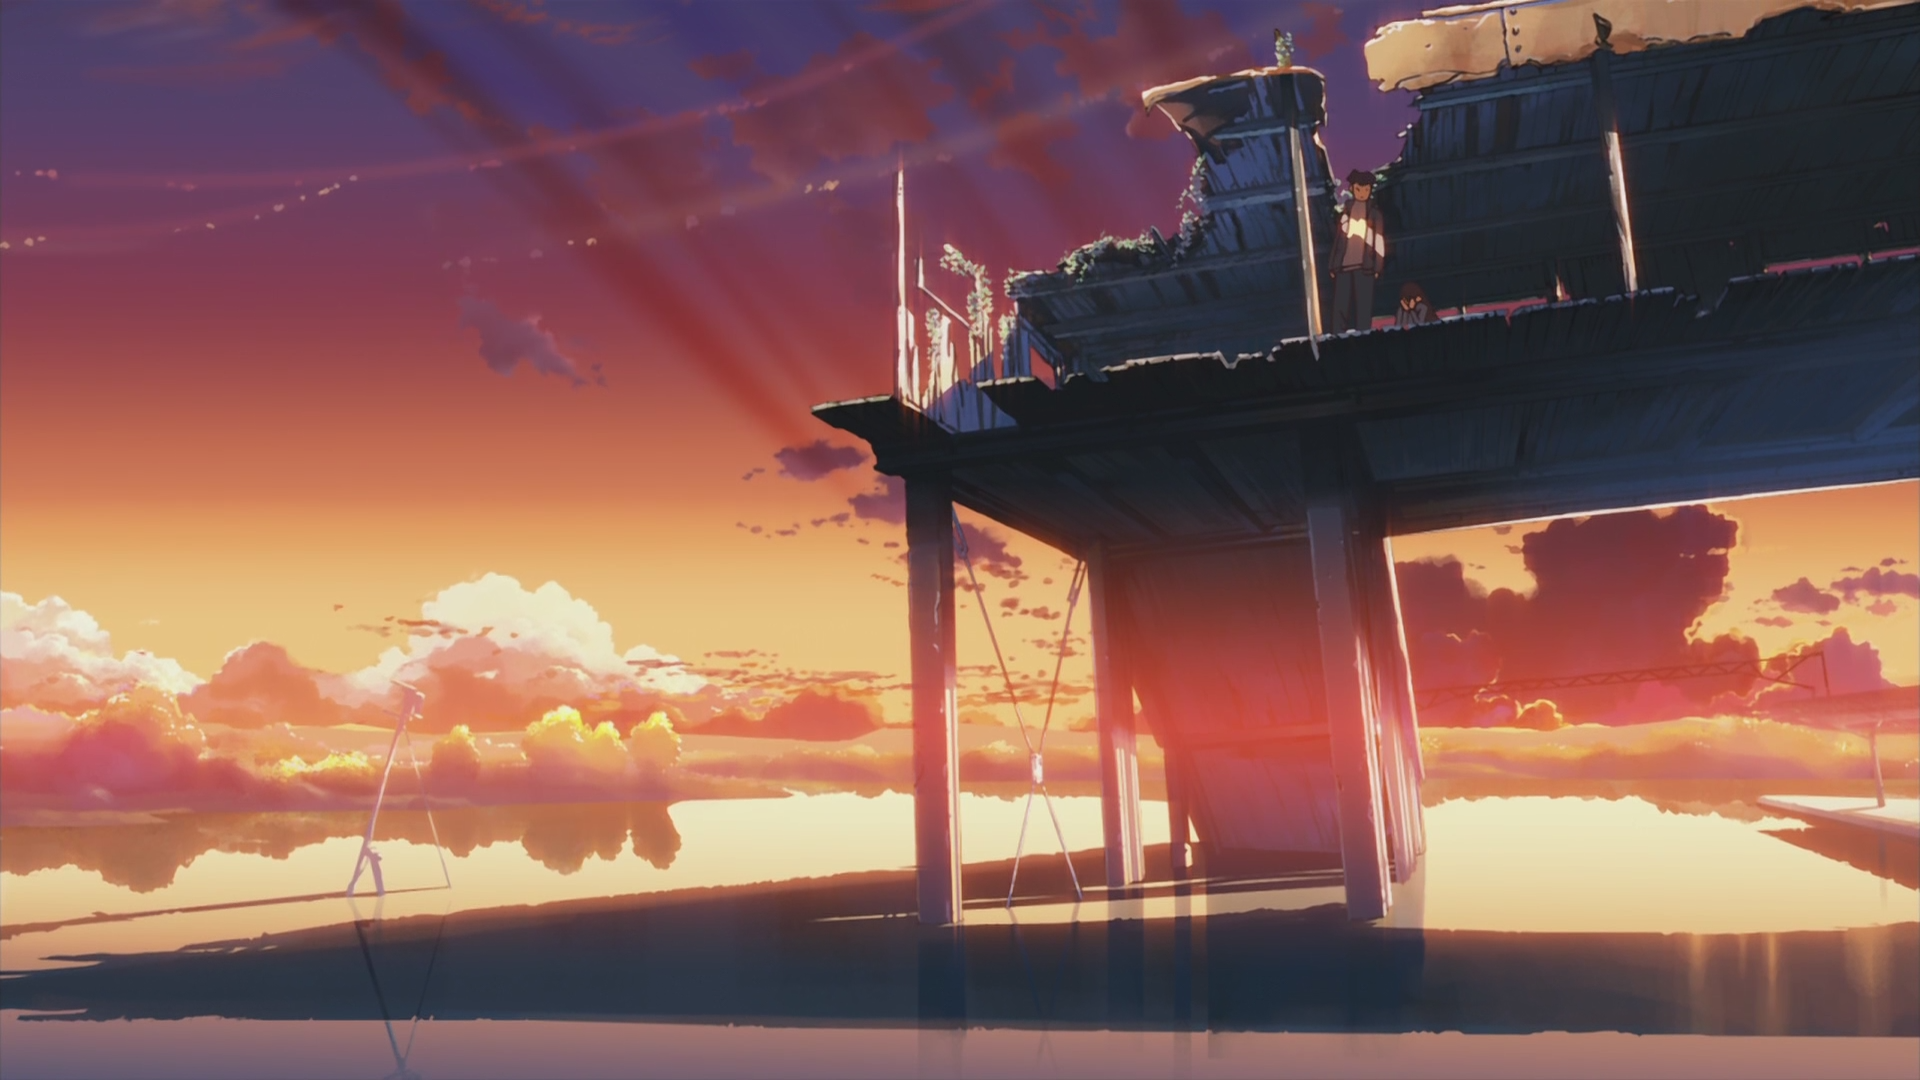 Makoto Shinkai, anime, The Place Promised in Our Early Days - desktop wallpaper